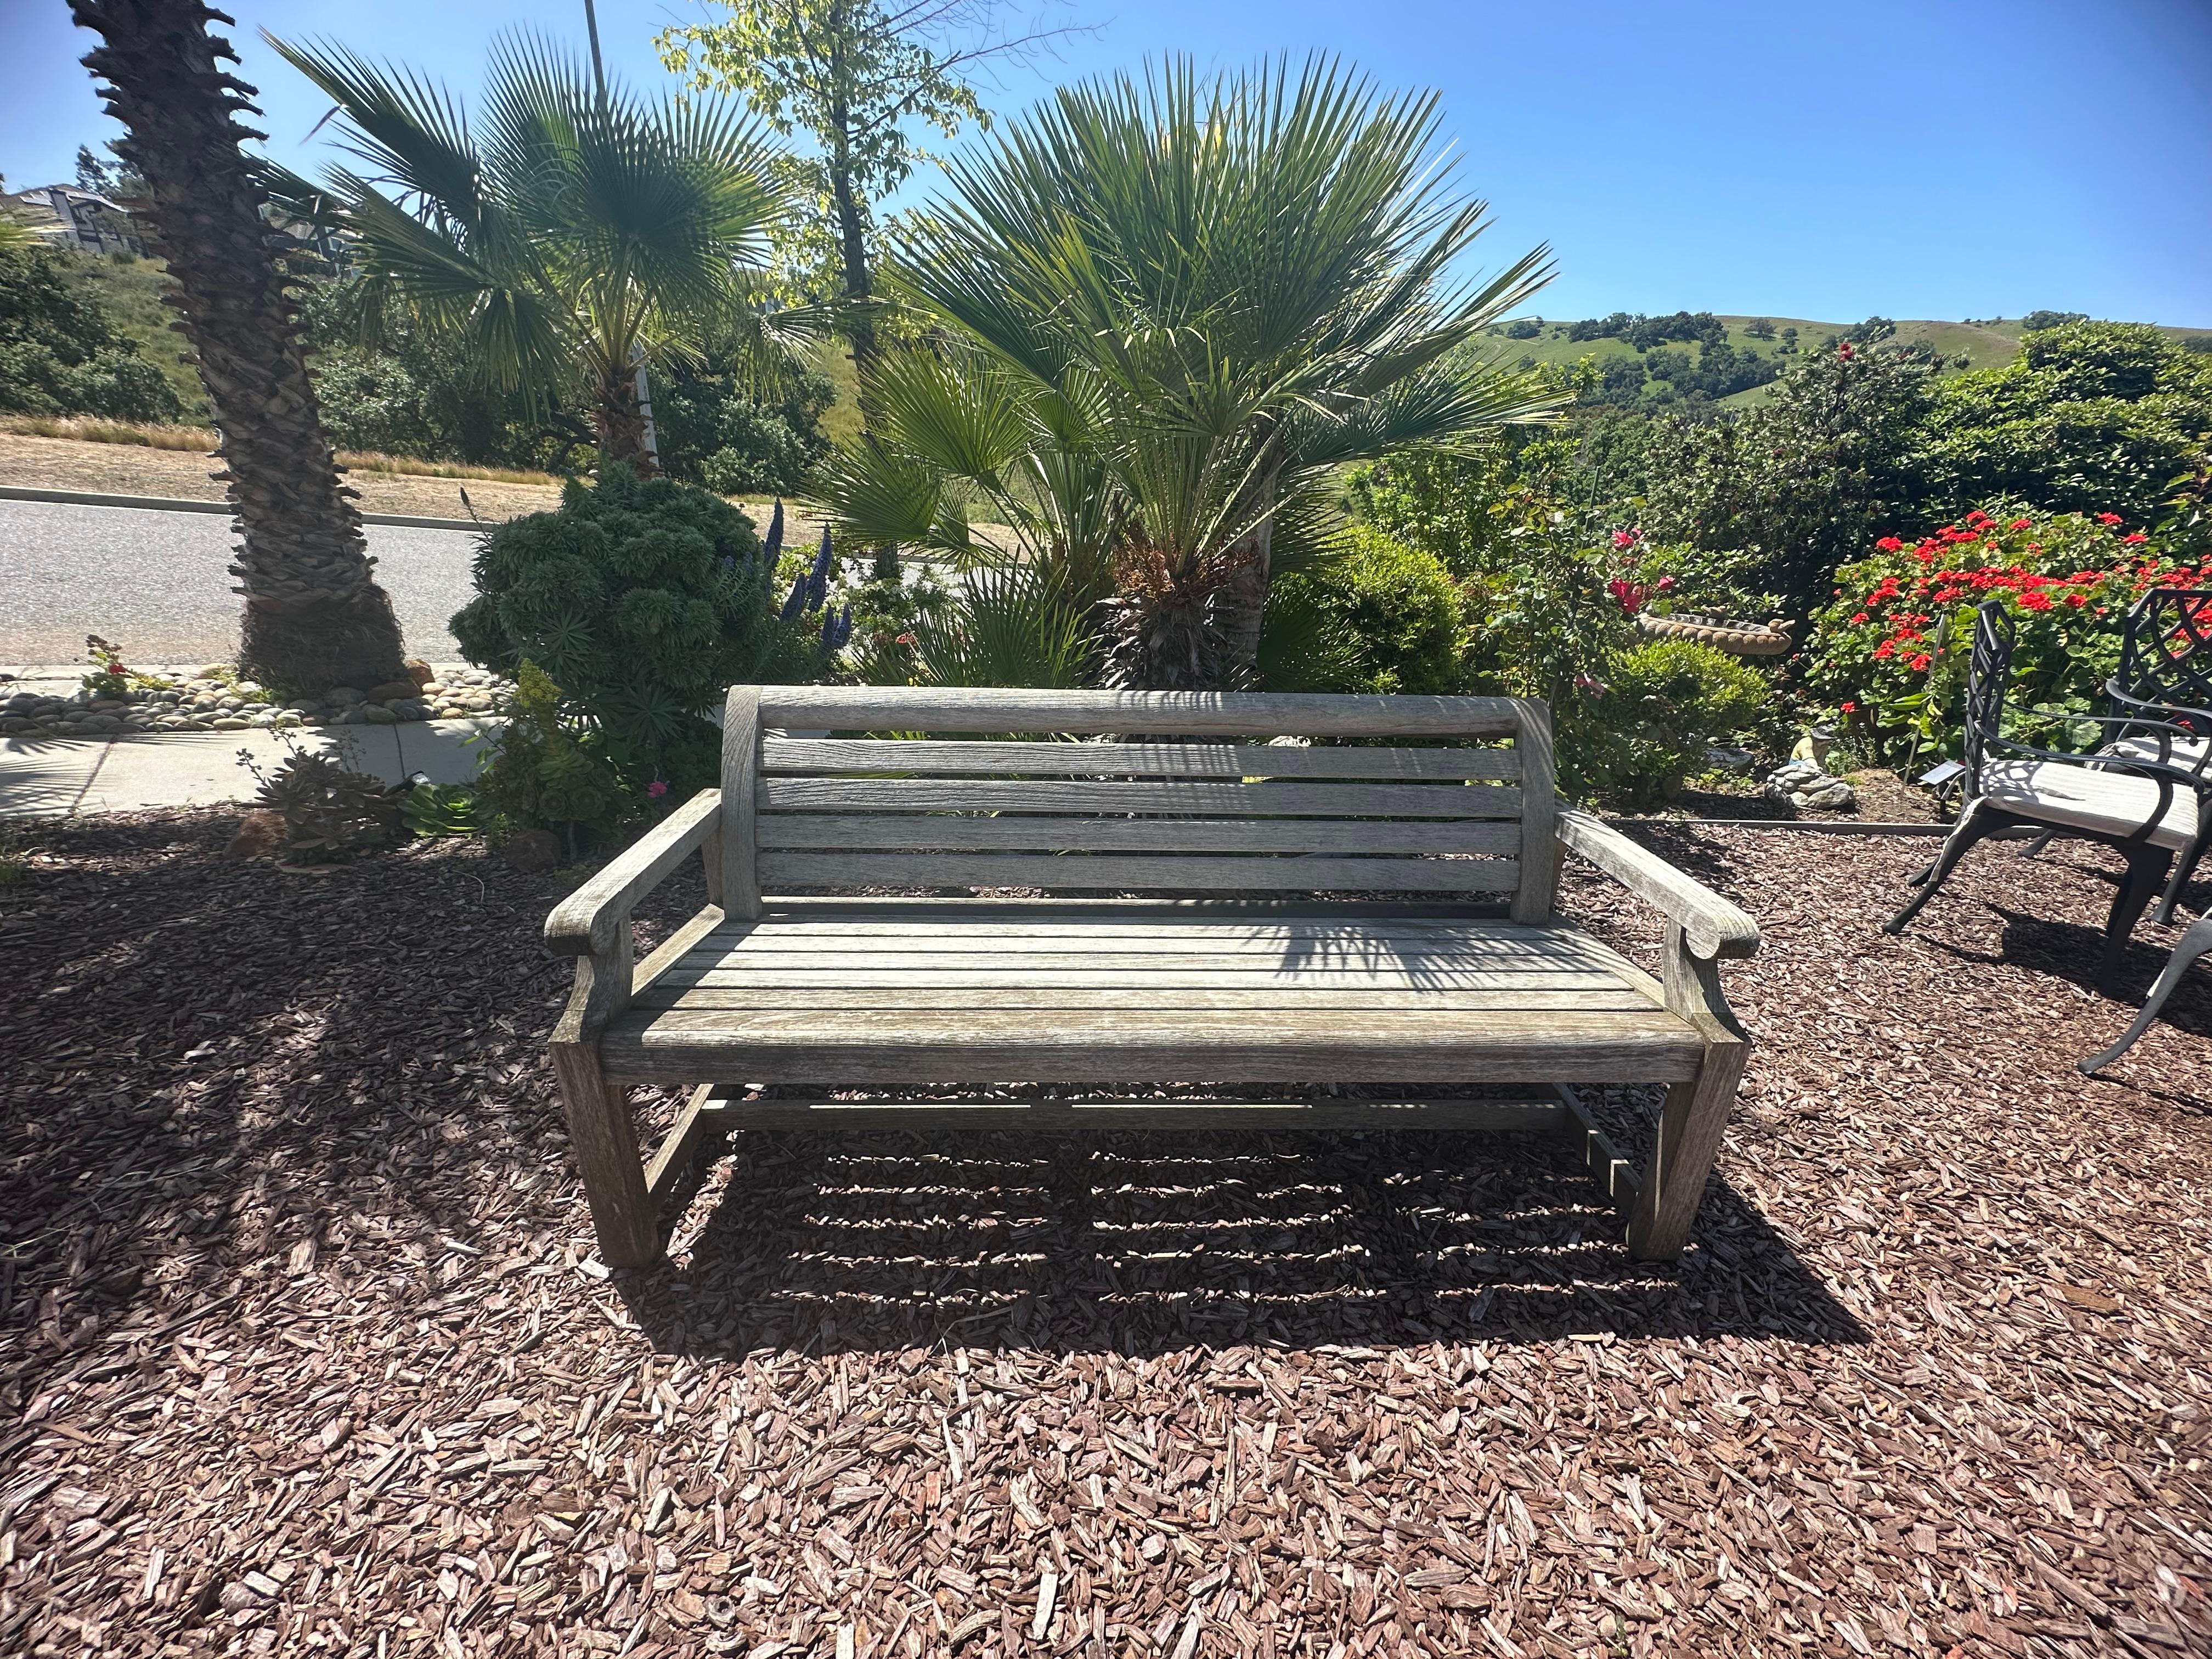 A beautifully weathered heavy duty park bench by Summit furniture manufacturing
In great condition
Beautiful focal point piece
Great for any location 
Very thick pieces
72” length 
Made in 2009
Marked 